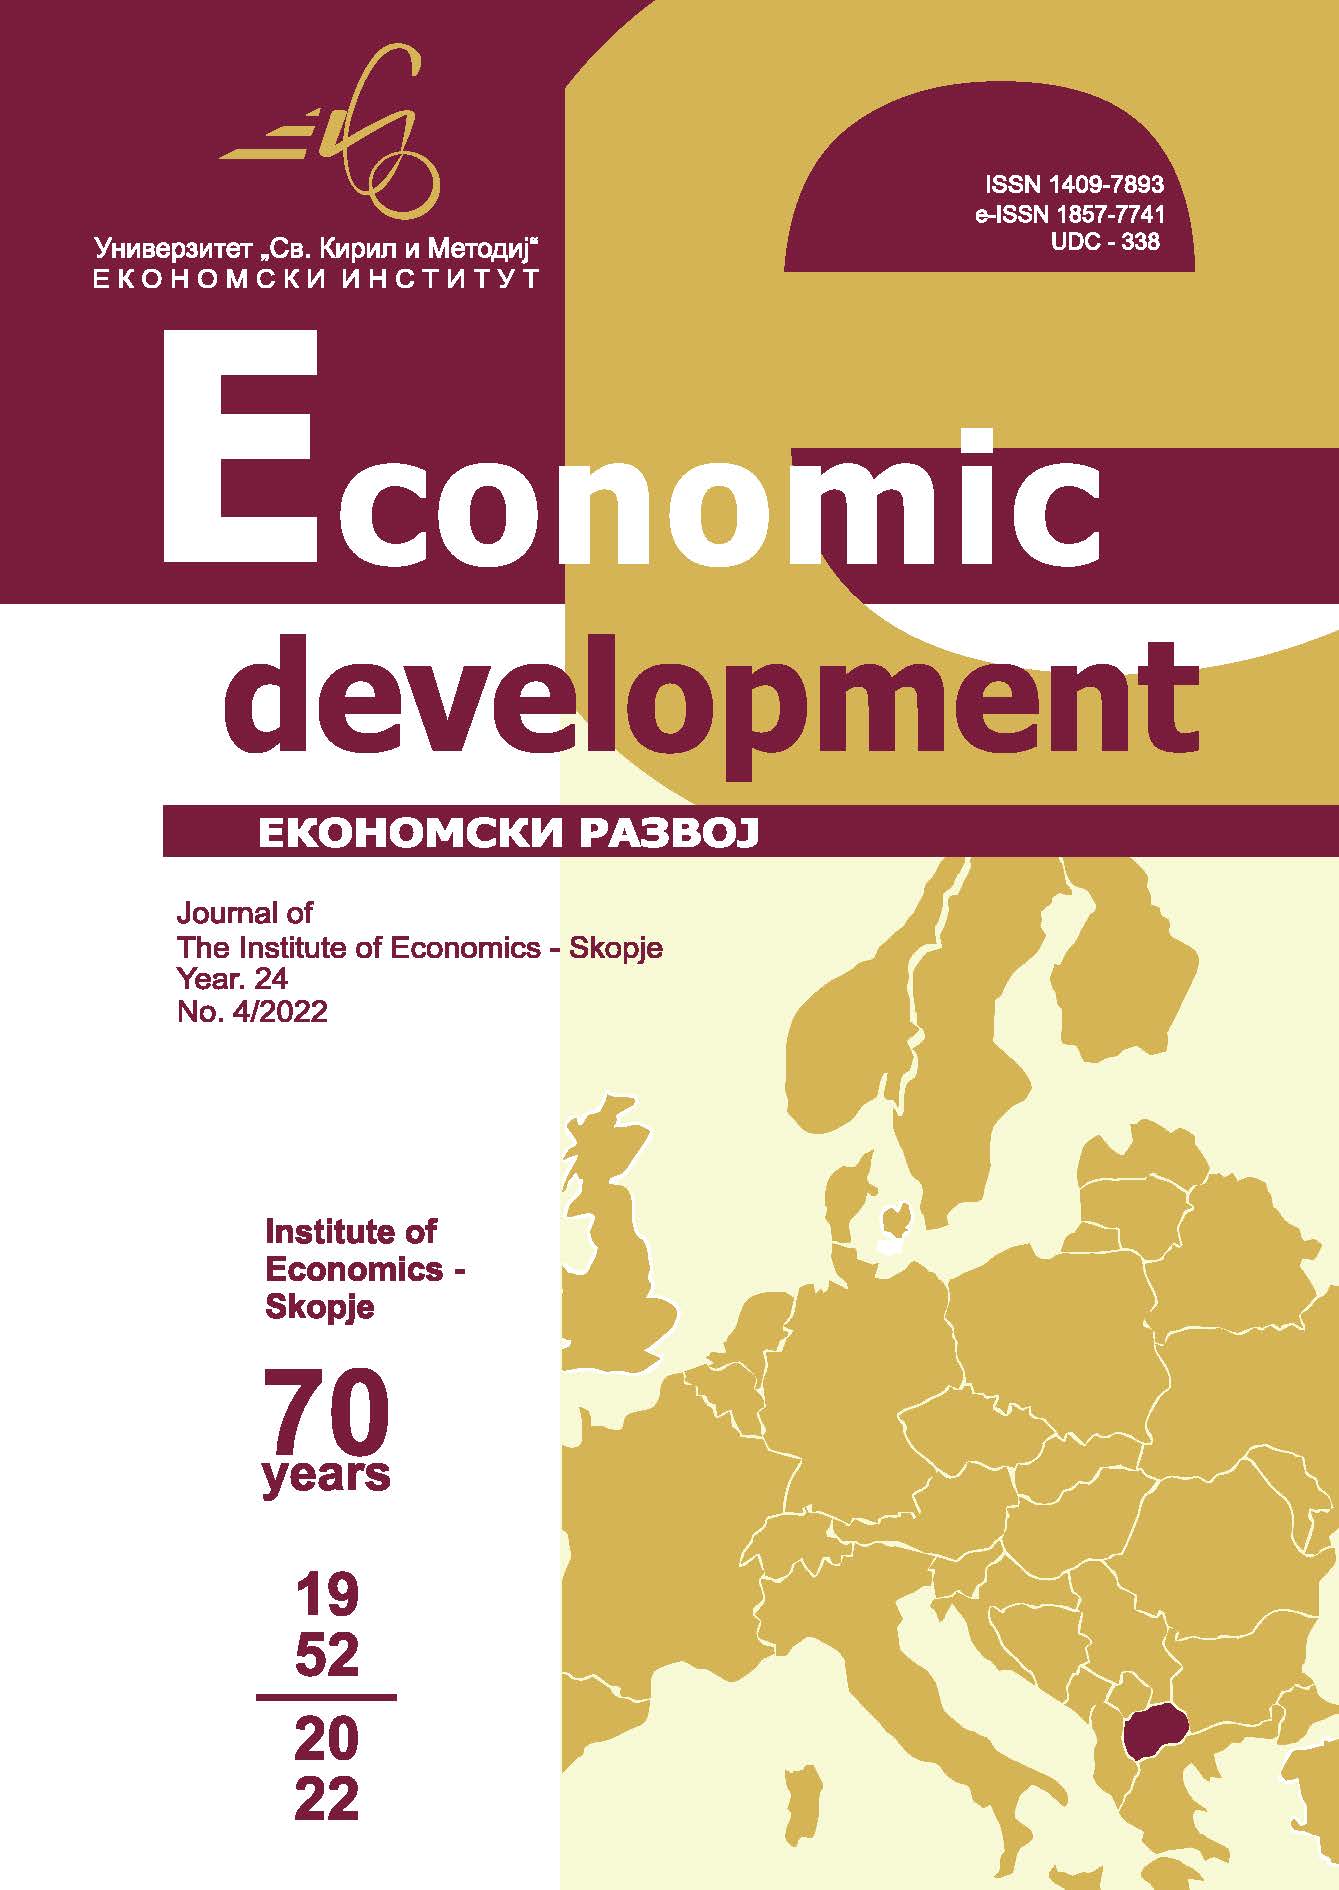 PUBLIC FINANCE SPENDING OVERVIEW IN COVID AND MID TERM PERIOD: THE CASE OF NORTH MACEDONIA